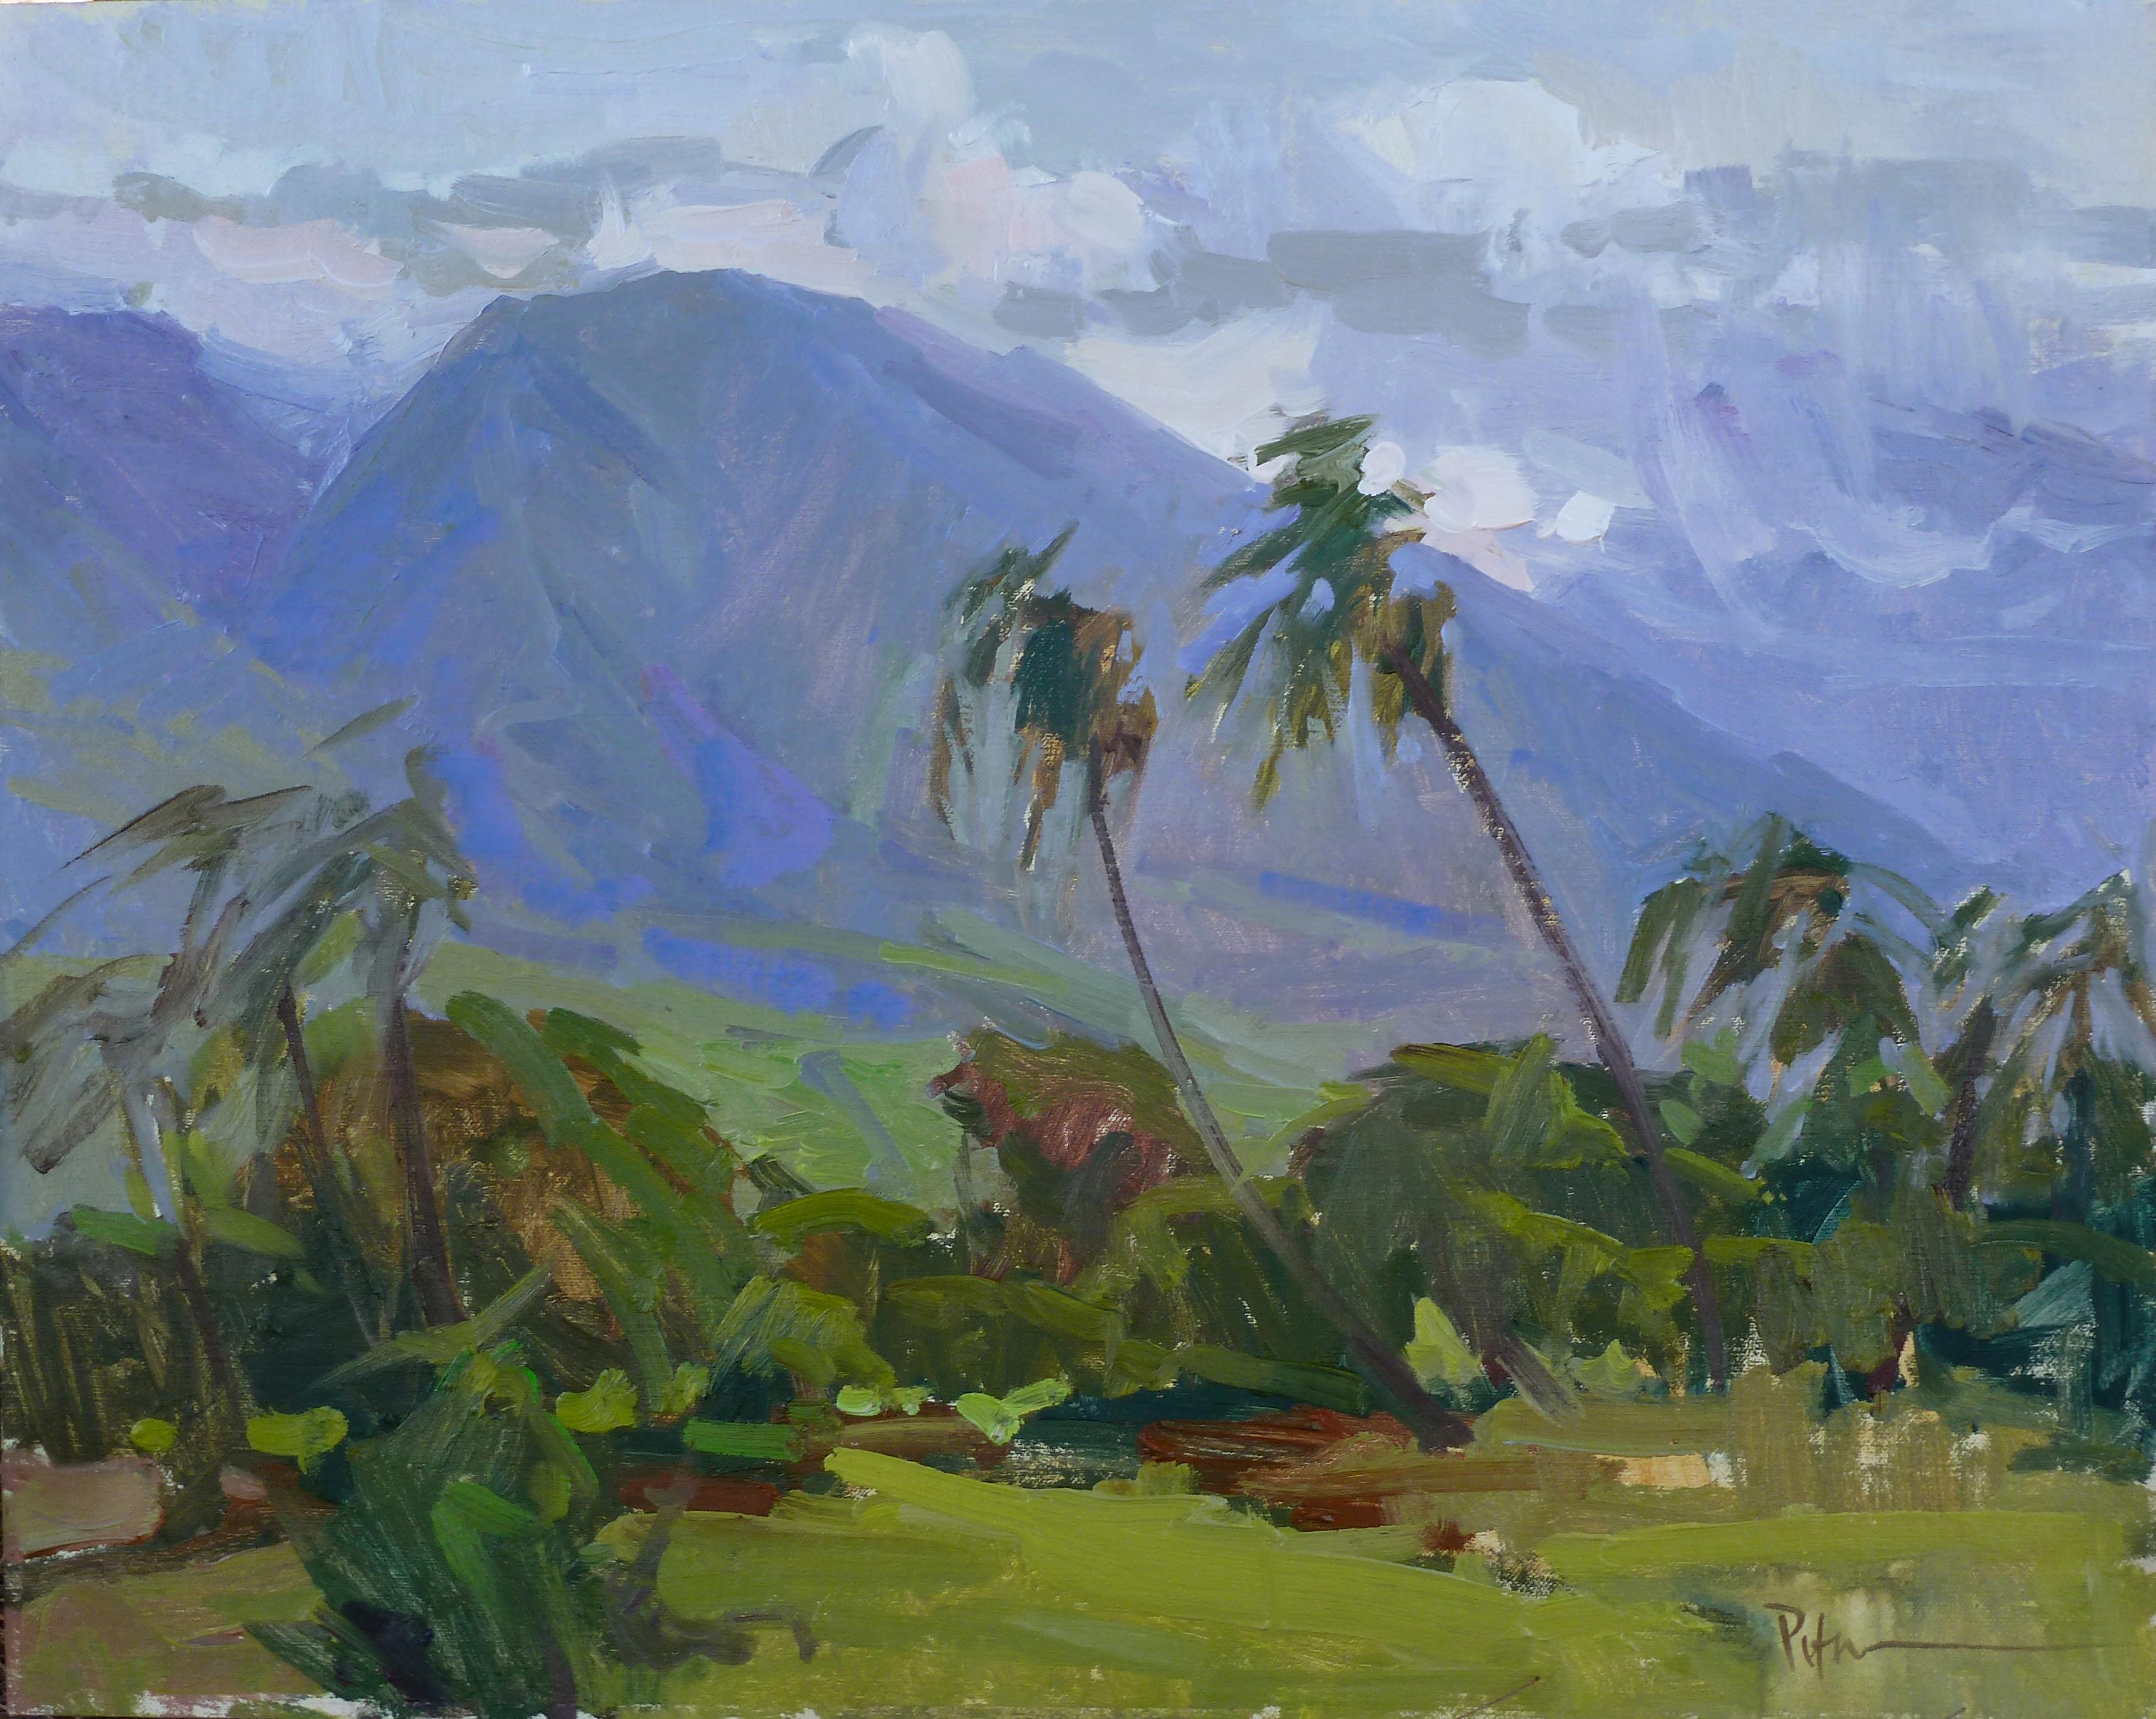 The Impressionist painting Island Living  by Lori Putnam was painted plein aire  in Hawaii.  

Lori Putnam statement: :As a Contemporary American Impressionist, what interests me is rarely any specific subject unto itself. Instead I see color